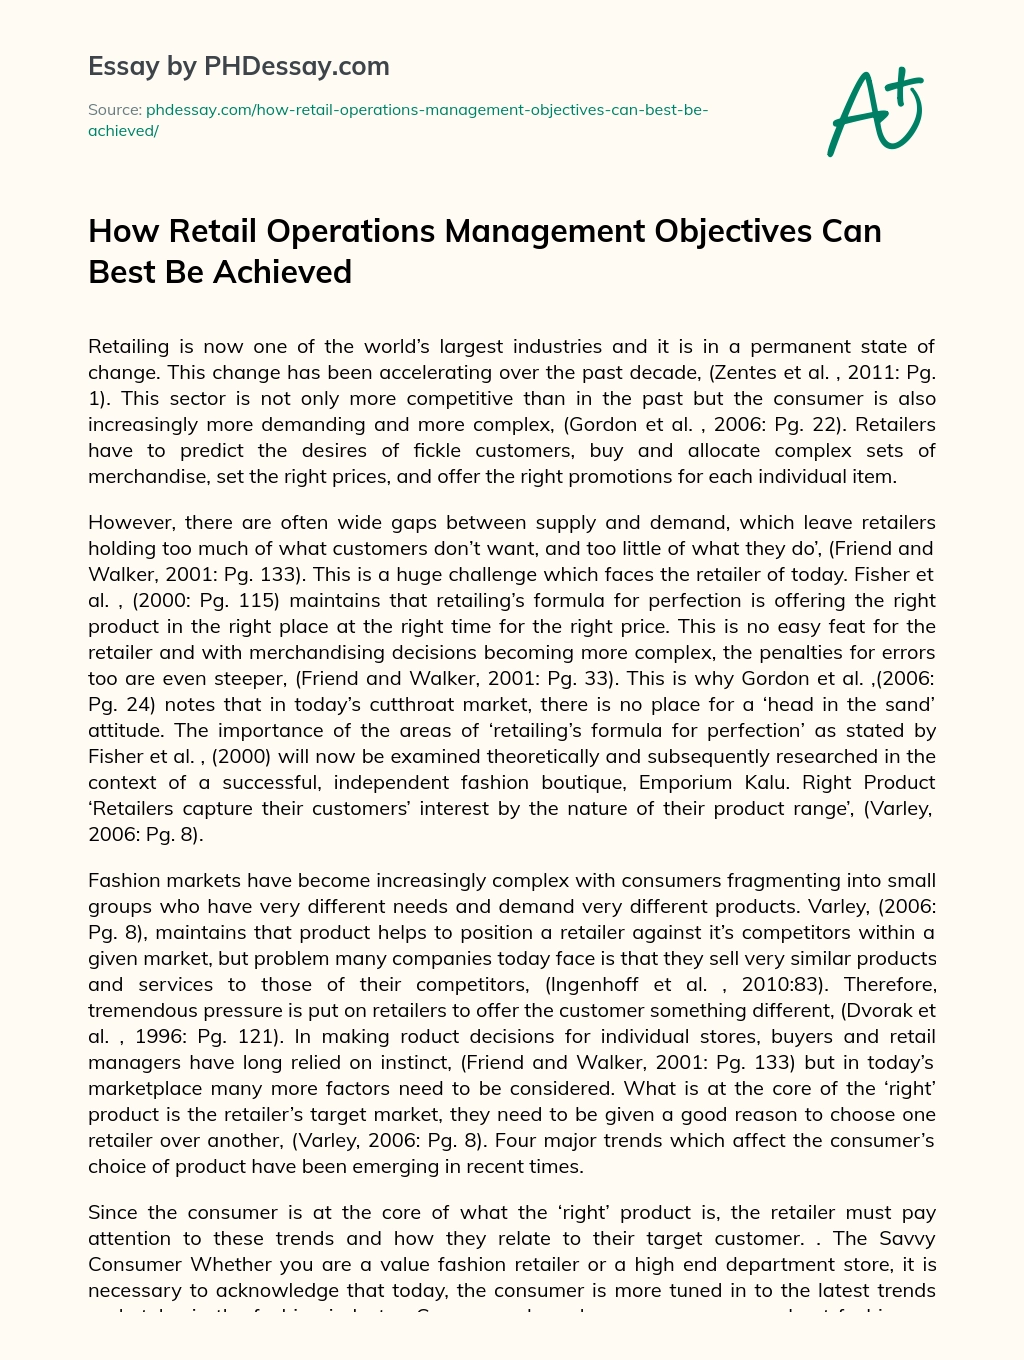 How Retail Operations Management Objectives Can Best Be Achieved essay